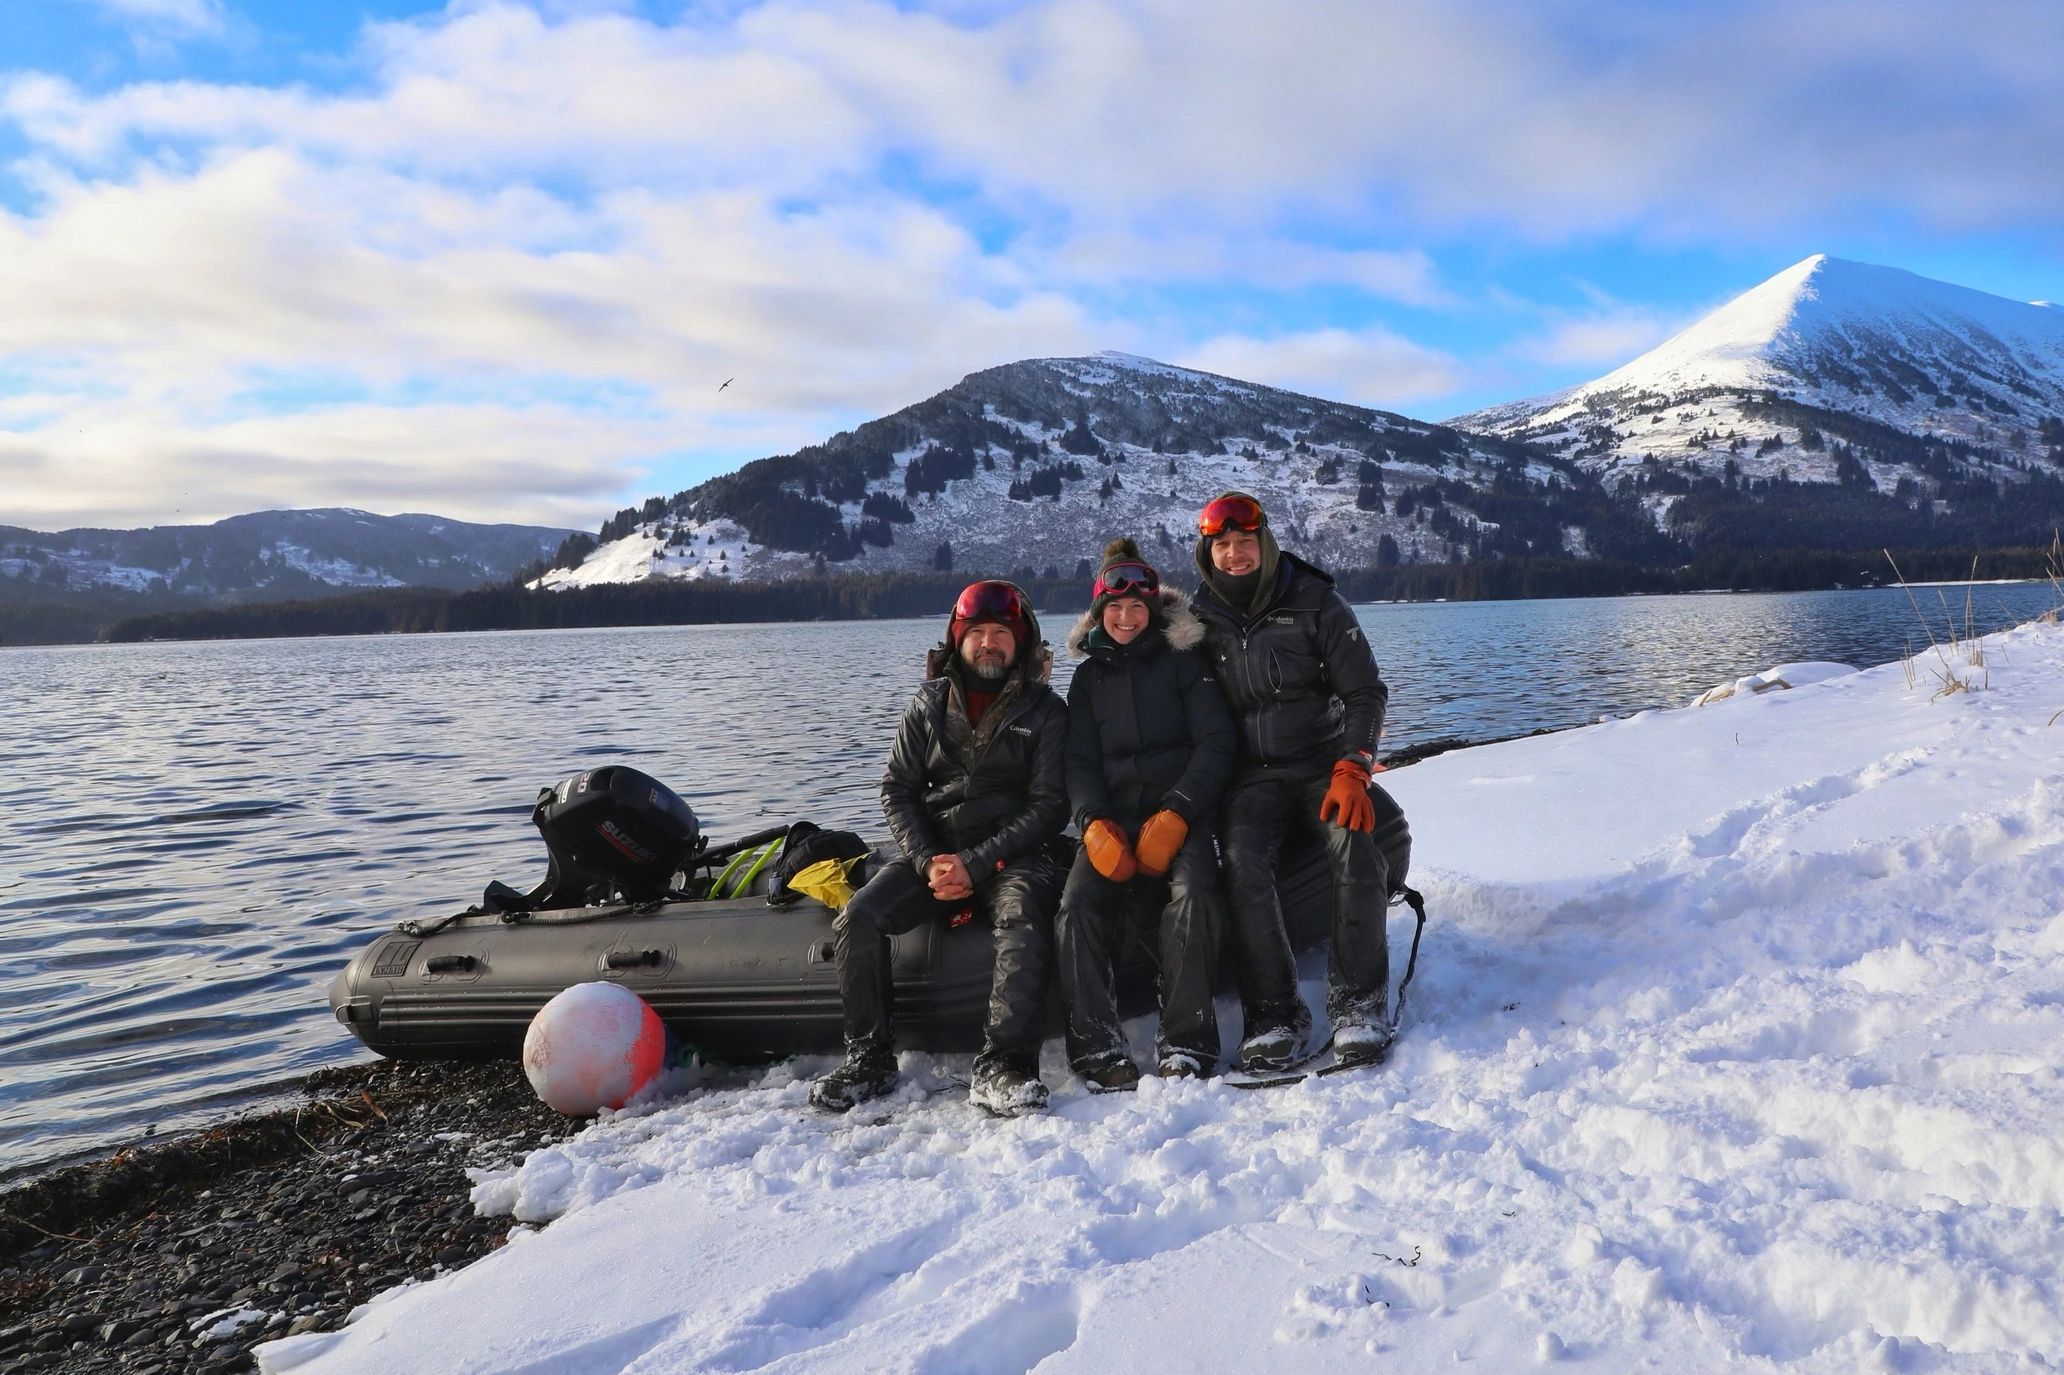 From left to right: Tim, Heather, Matt on a remote Alaska Wildlife viewing trip. 